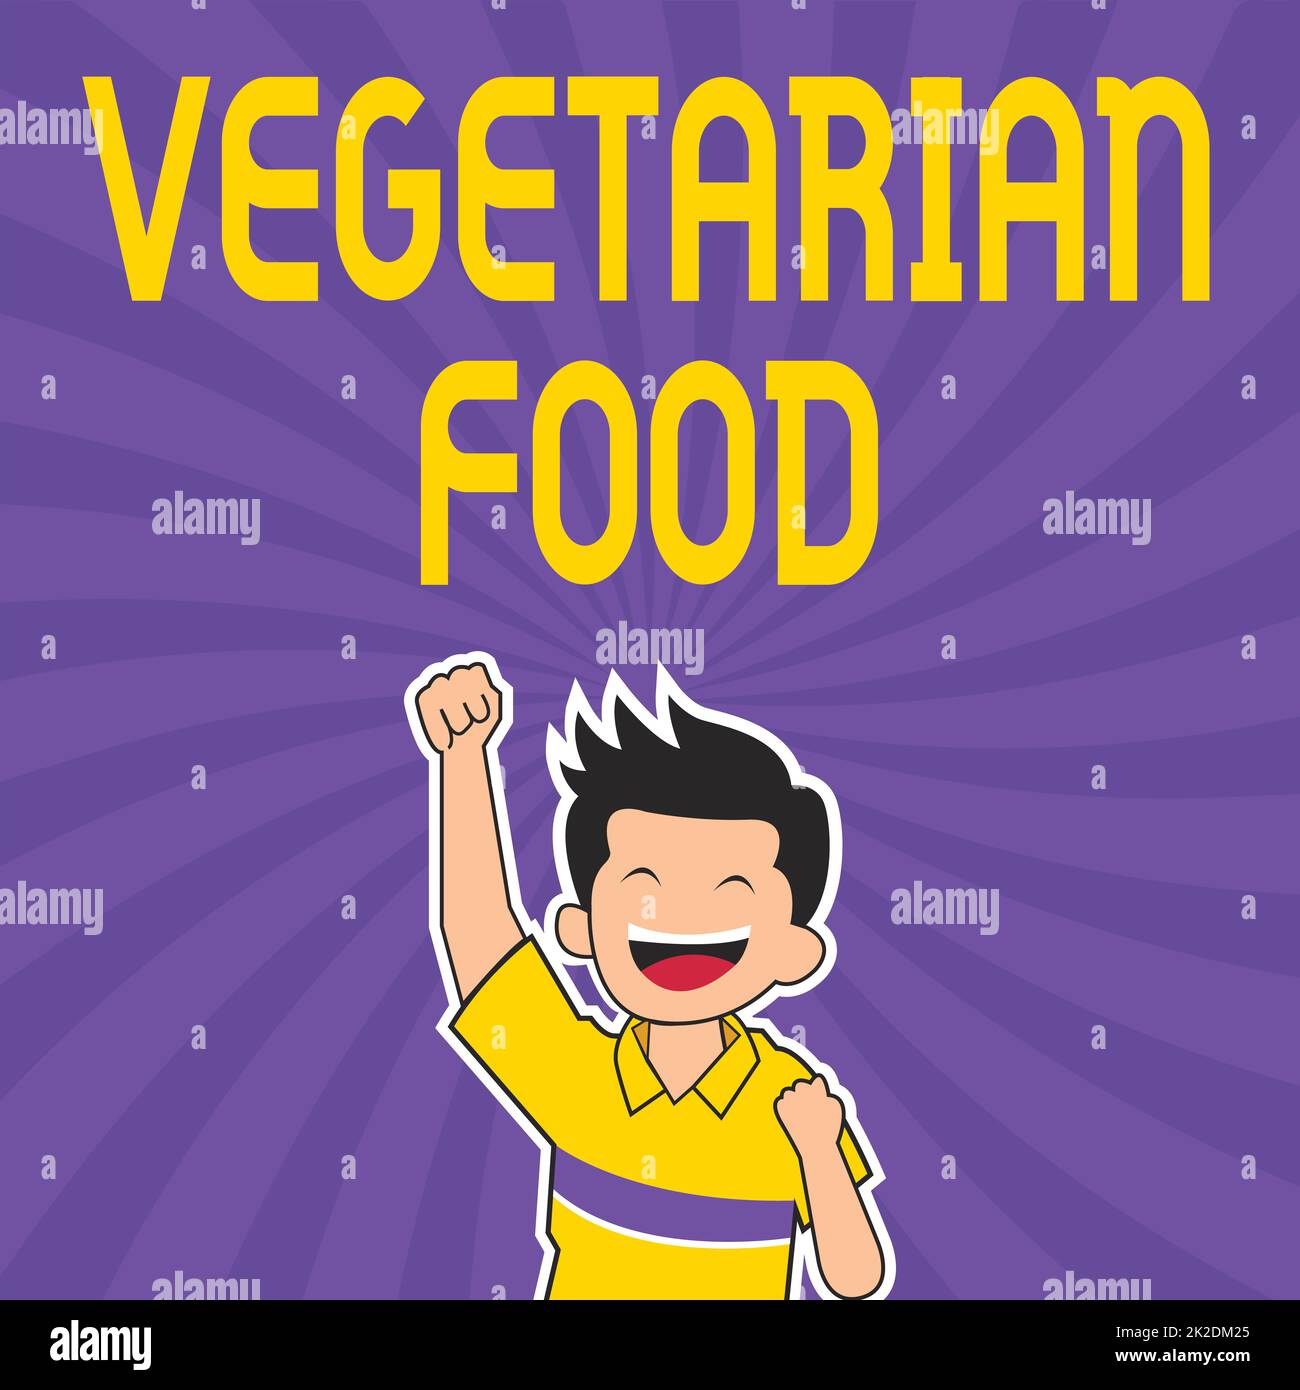 Inspiration showing sign Vegetarian Food. Business idea cuisine refers to food that meets vegetarian standards Cheerful Man Enjoying Accomplishment With Spiral Background Raising Hand. Stock Photo